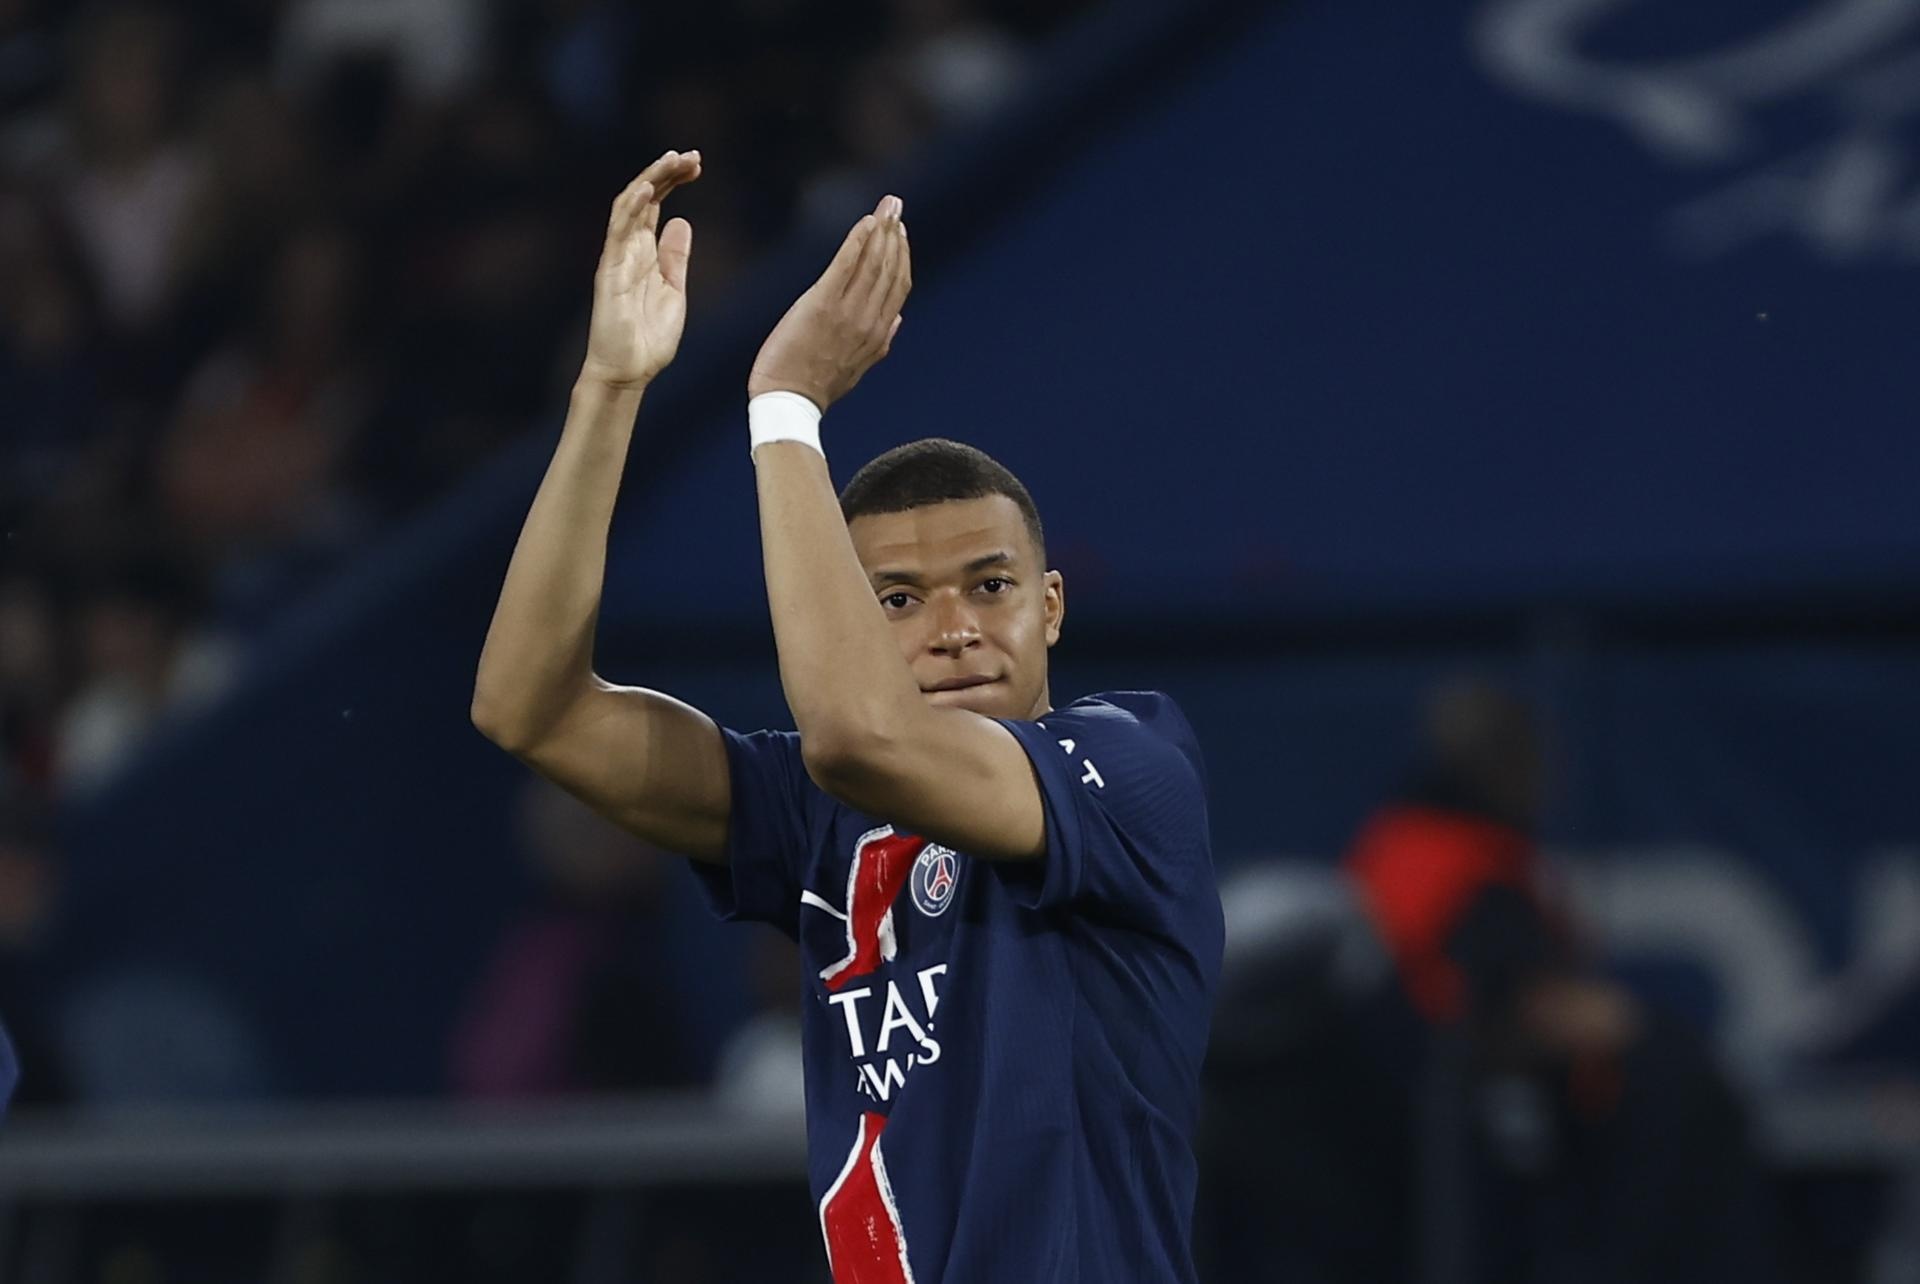 Real Madrid wants Mbappe to join their pre-season squad in August. EFE